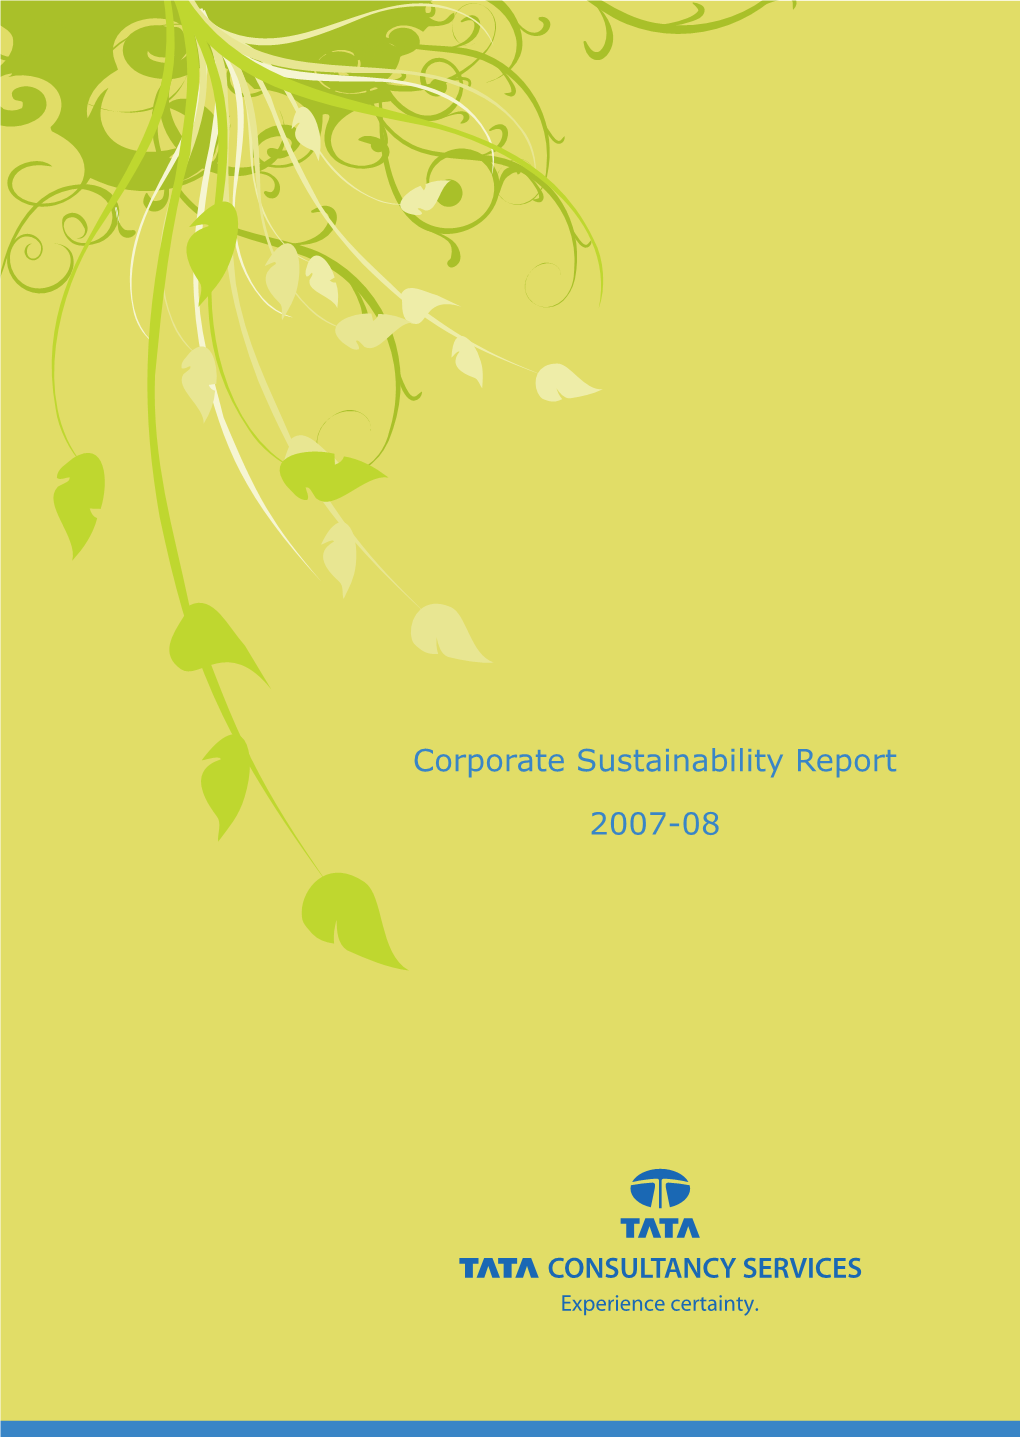 Corporate Sustainability Report 2007-08 Abbreviations and Acronyms Corporate Sustainability Report 2007-08 Abbreviations and Acronyms I Ii